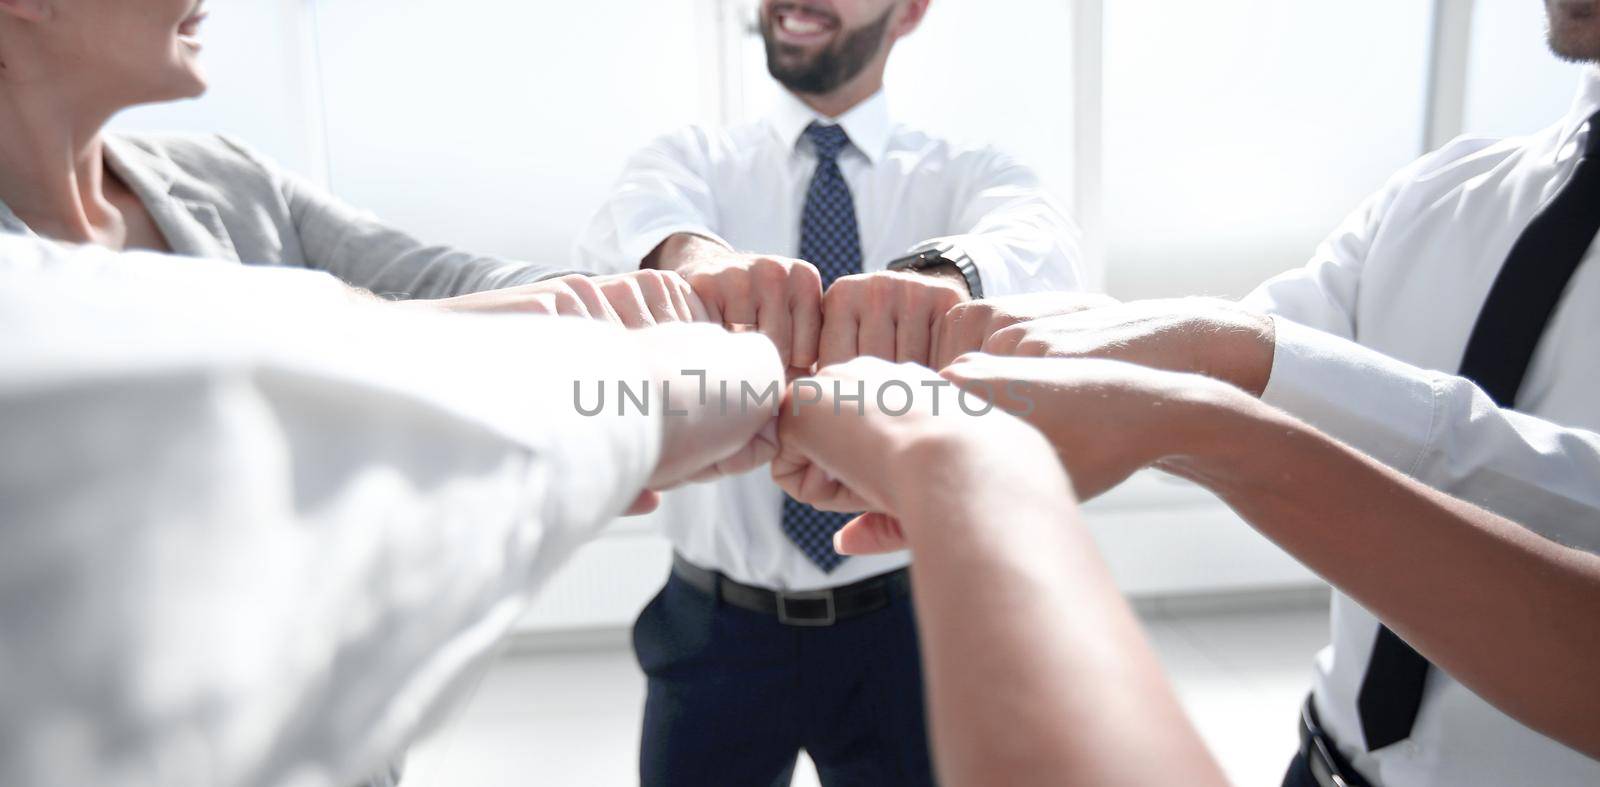 close up.a group of business people showing their unity.the concept of teamwork